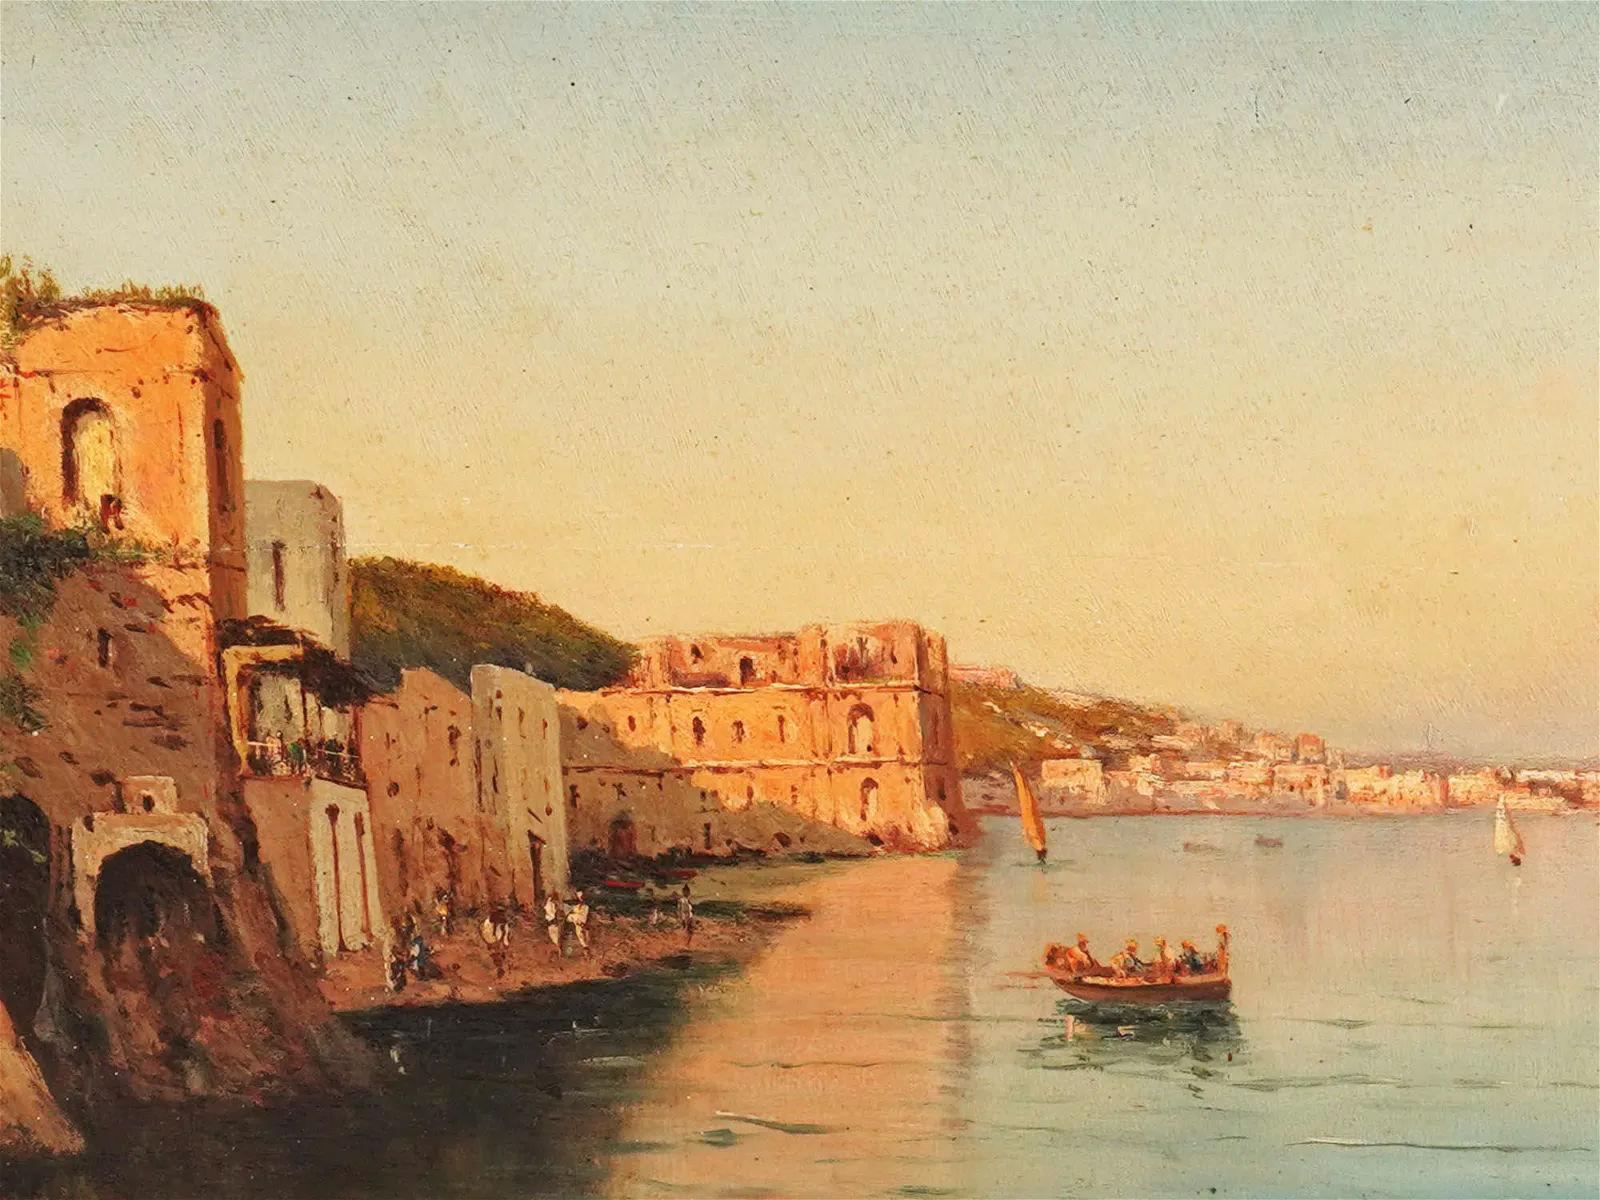 Our scene on wooden panel depicts the coastline in the Posillipo area of Naples. Board measures 9 by 15 inches and the period frame, 13 3/4 by 20 inches. Signed indistinctly with title on reverse, Posillipo Napoli.